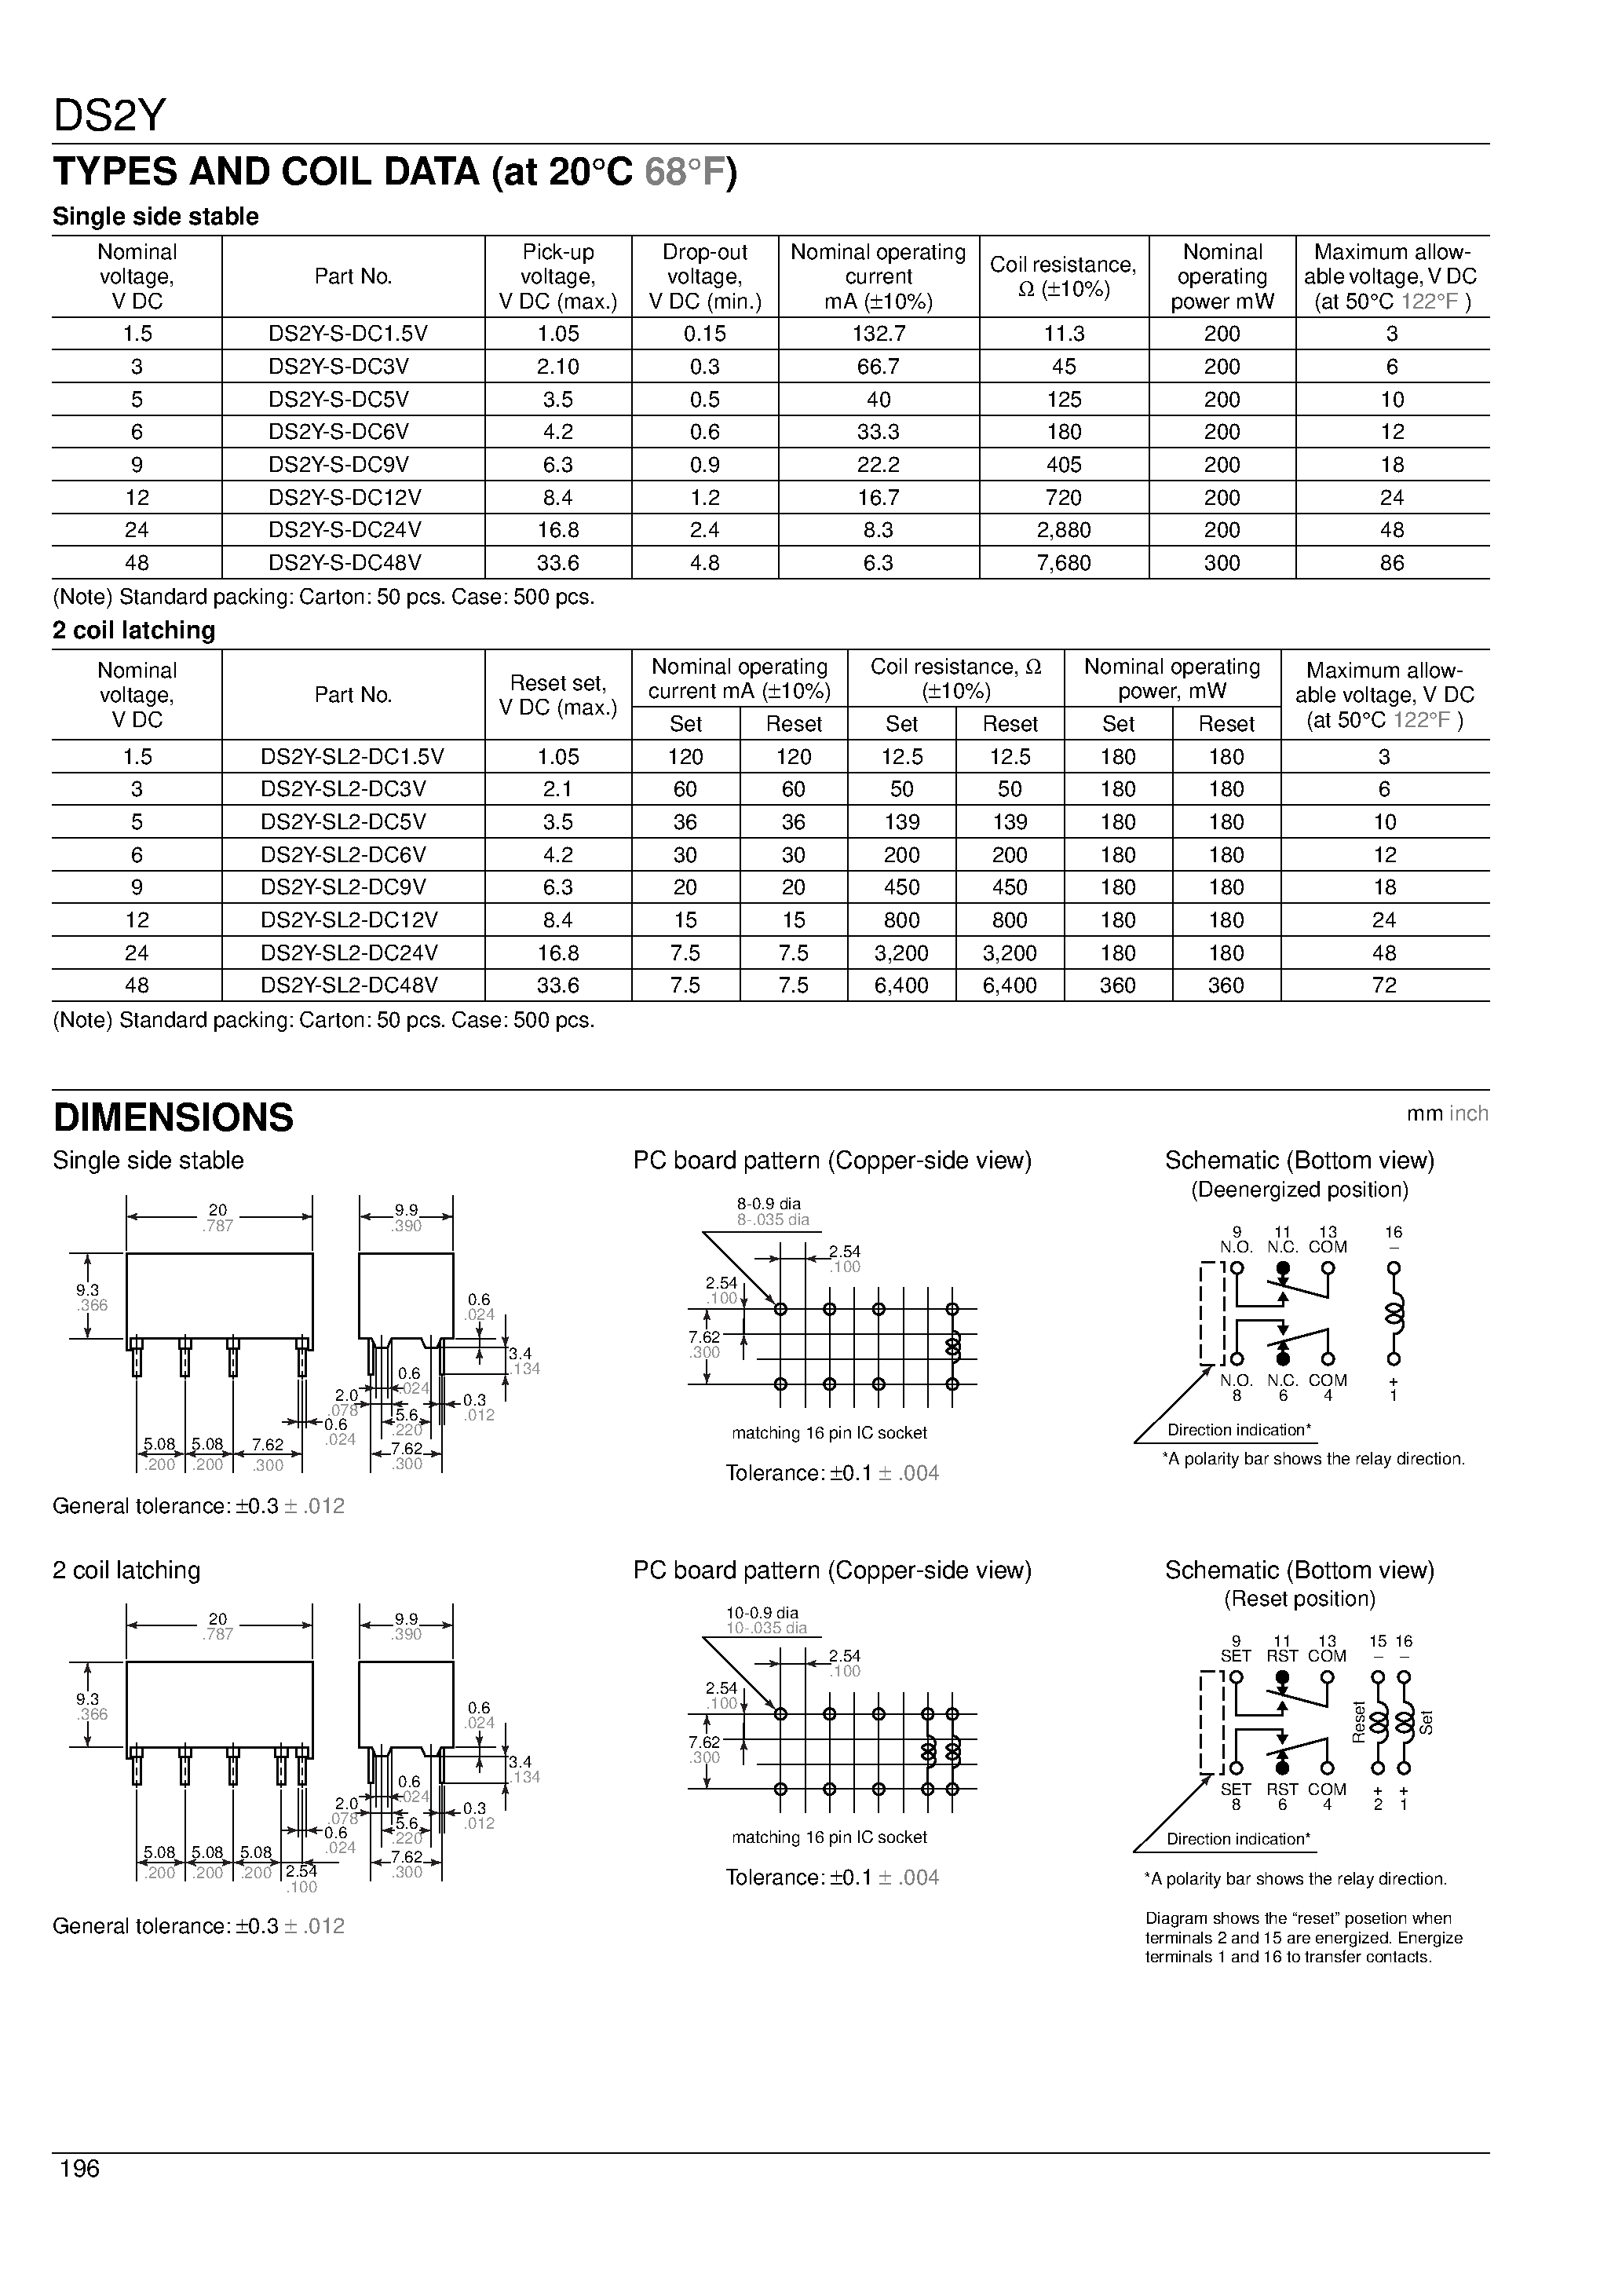 Datasheet DS2Y-S-DC1.5V - 2 Form C contact High sensitivity-200 mW nominal operating power page 2